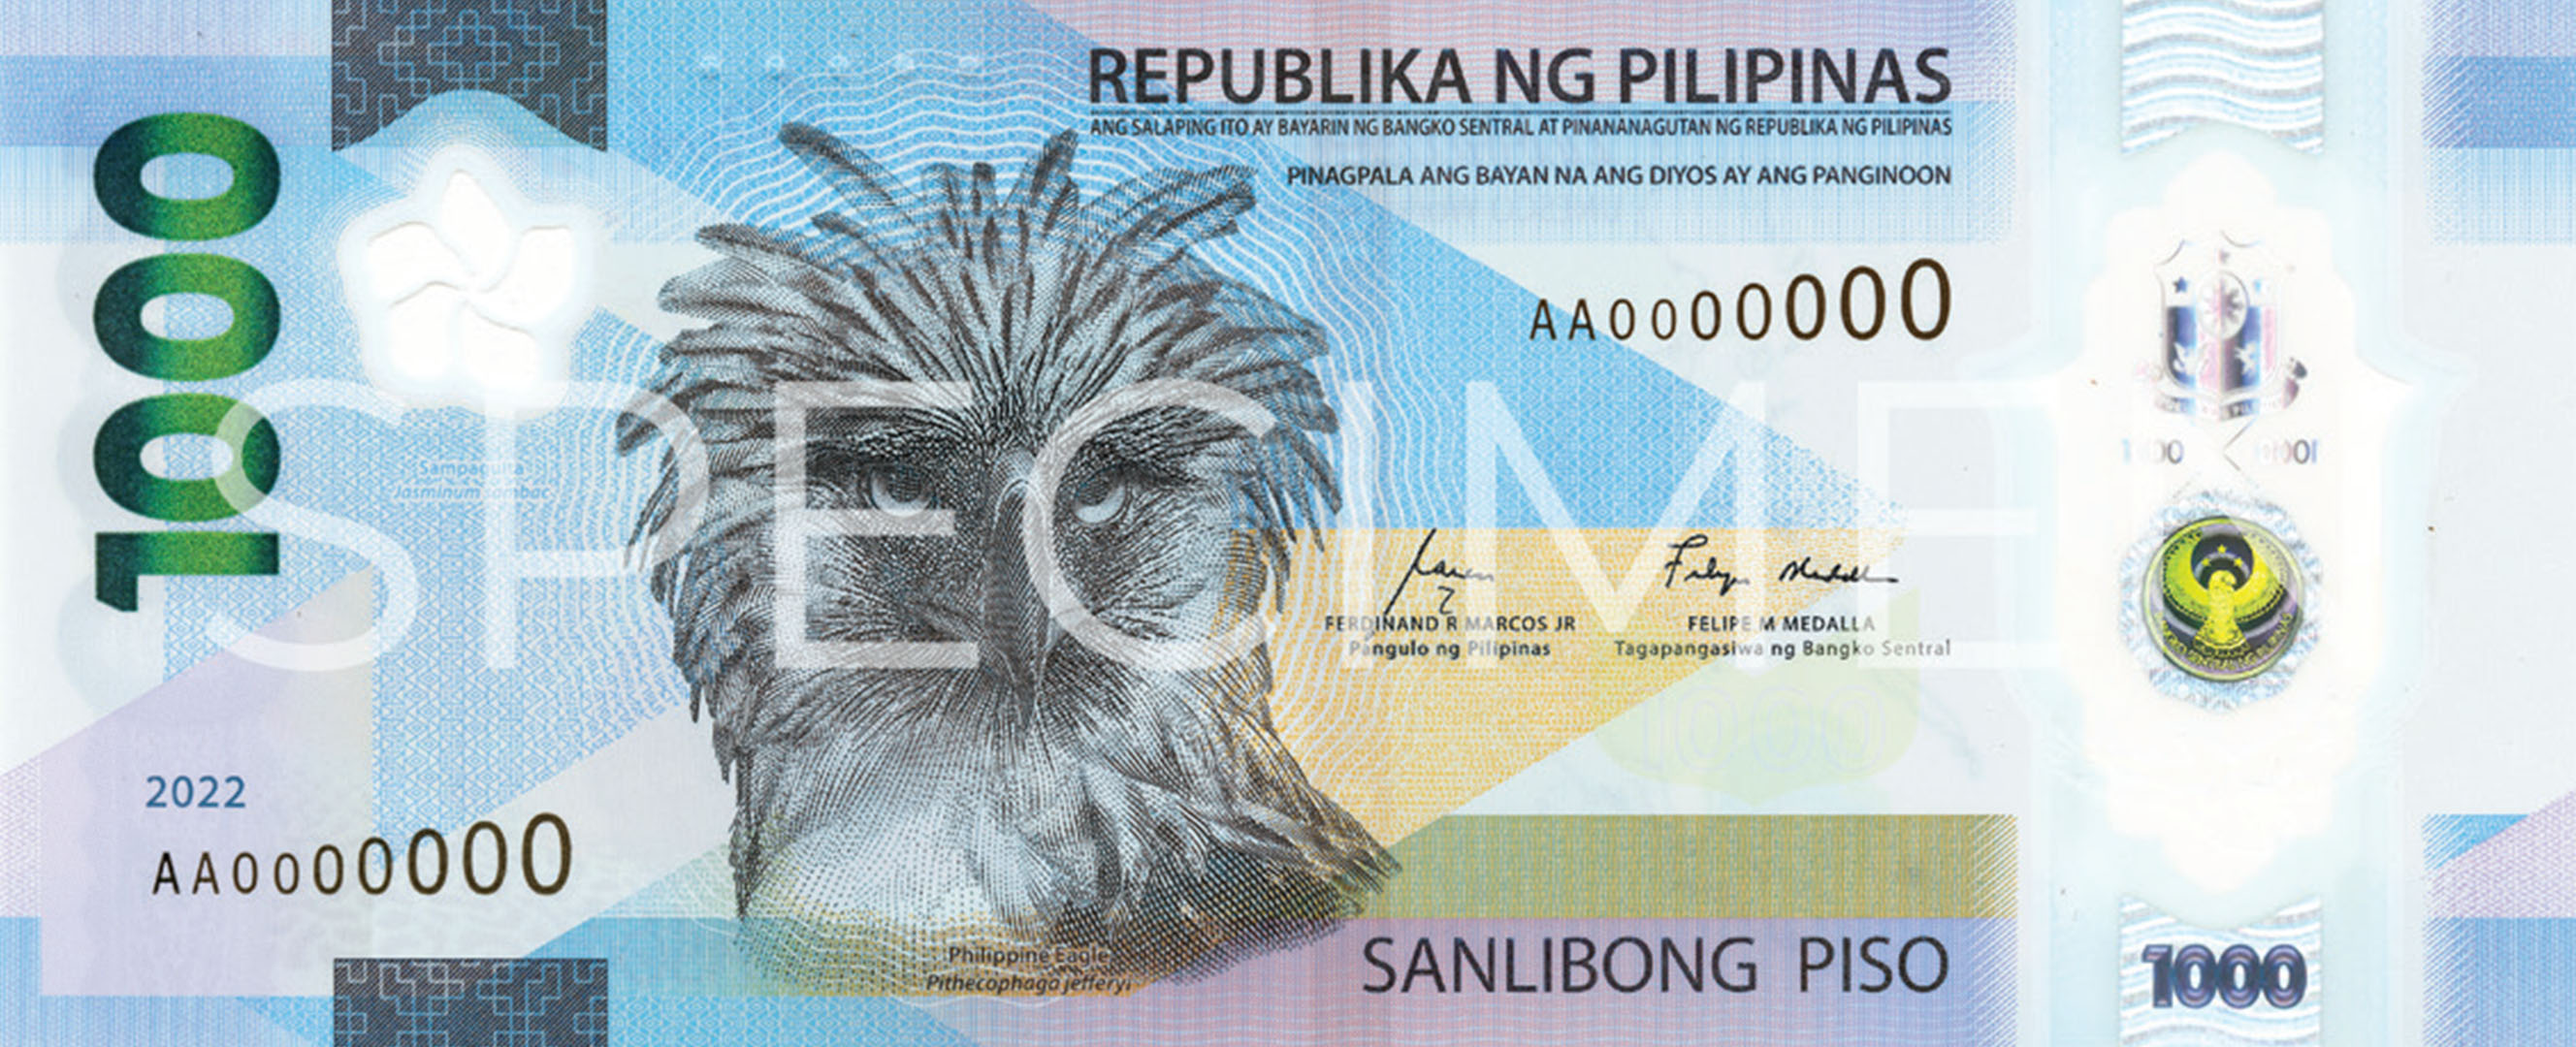 The Philippines’ new 1,000 peso banknote was released last year.